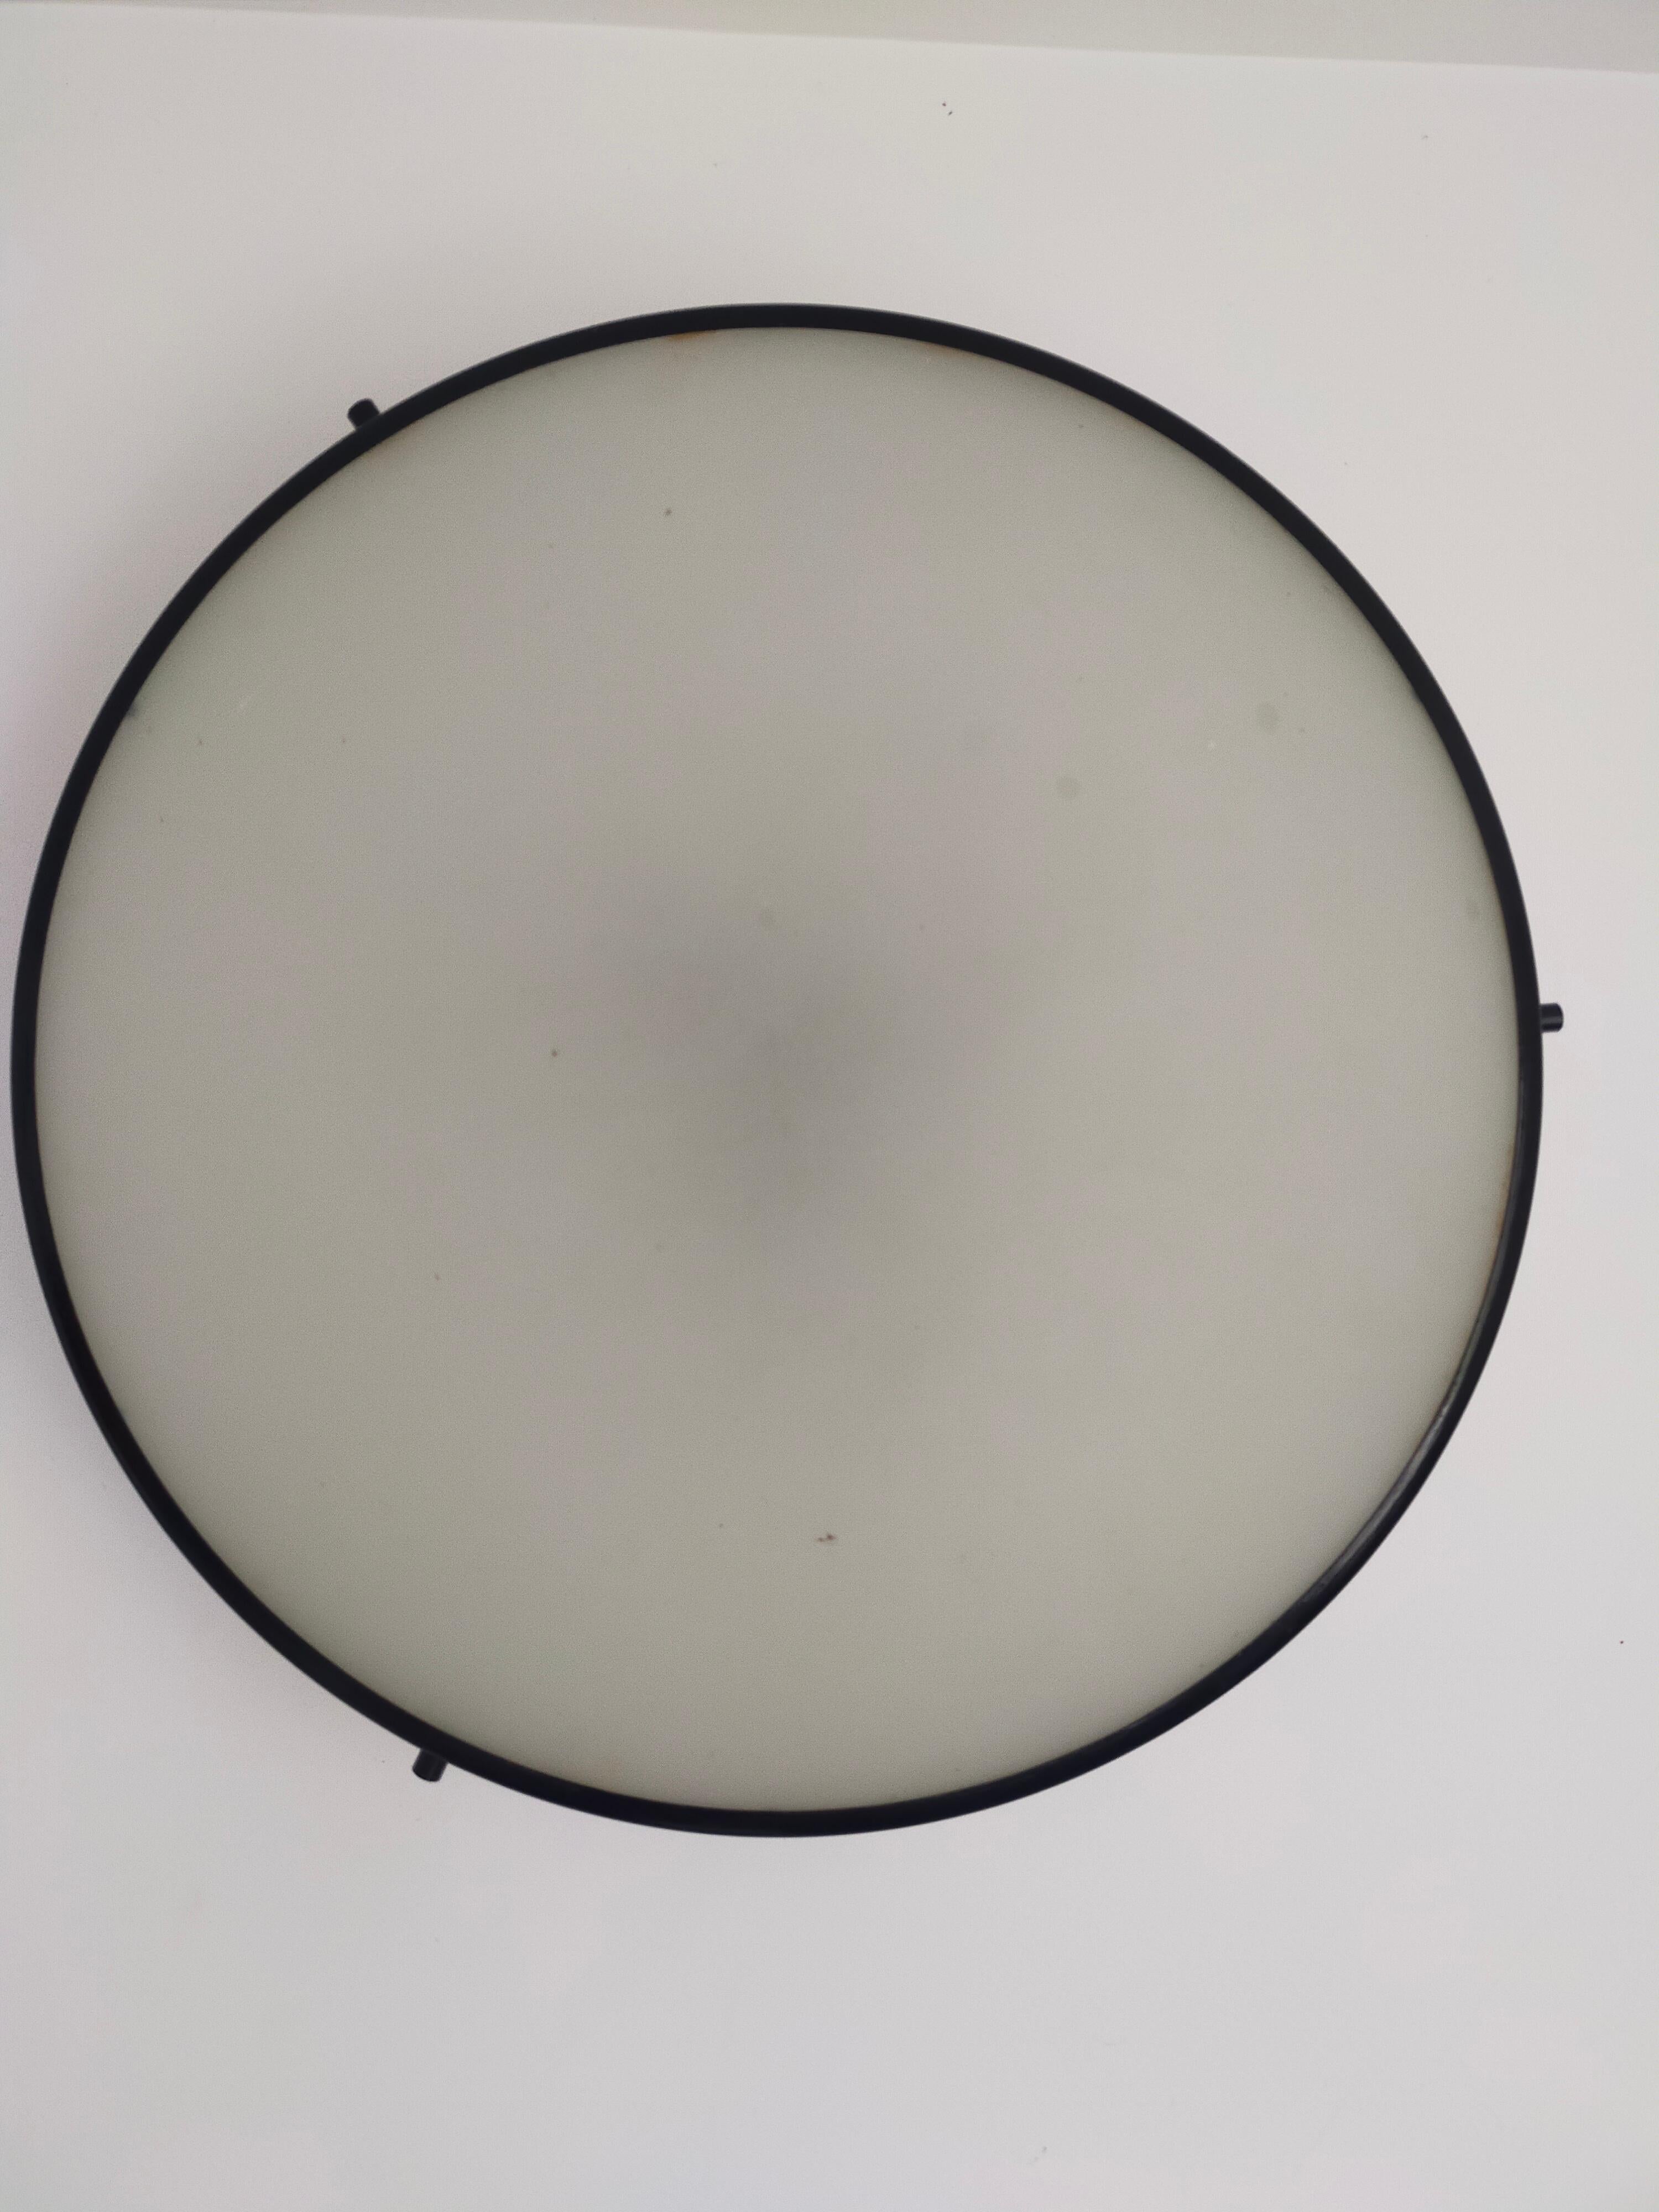 Very rare Black & white Pierre Paulin 3075/A ceiling light manufactured by Diderot circa 1955.
Circular black and white lacquered metal mount with frosted rounded glass diffuser.

Ref. 